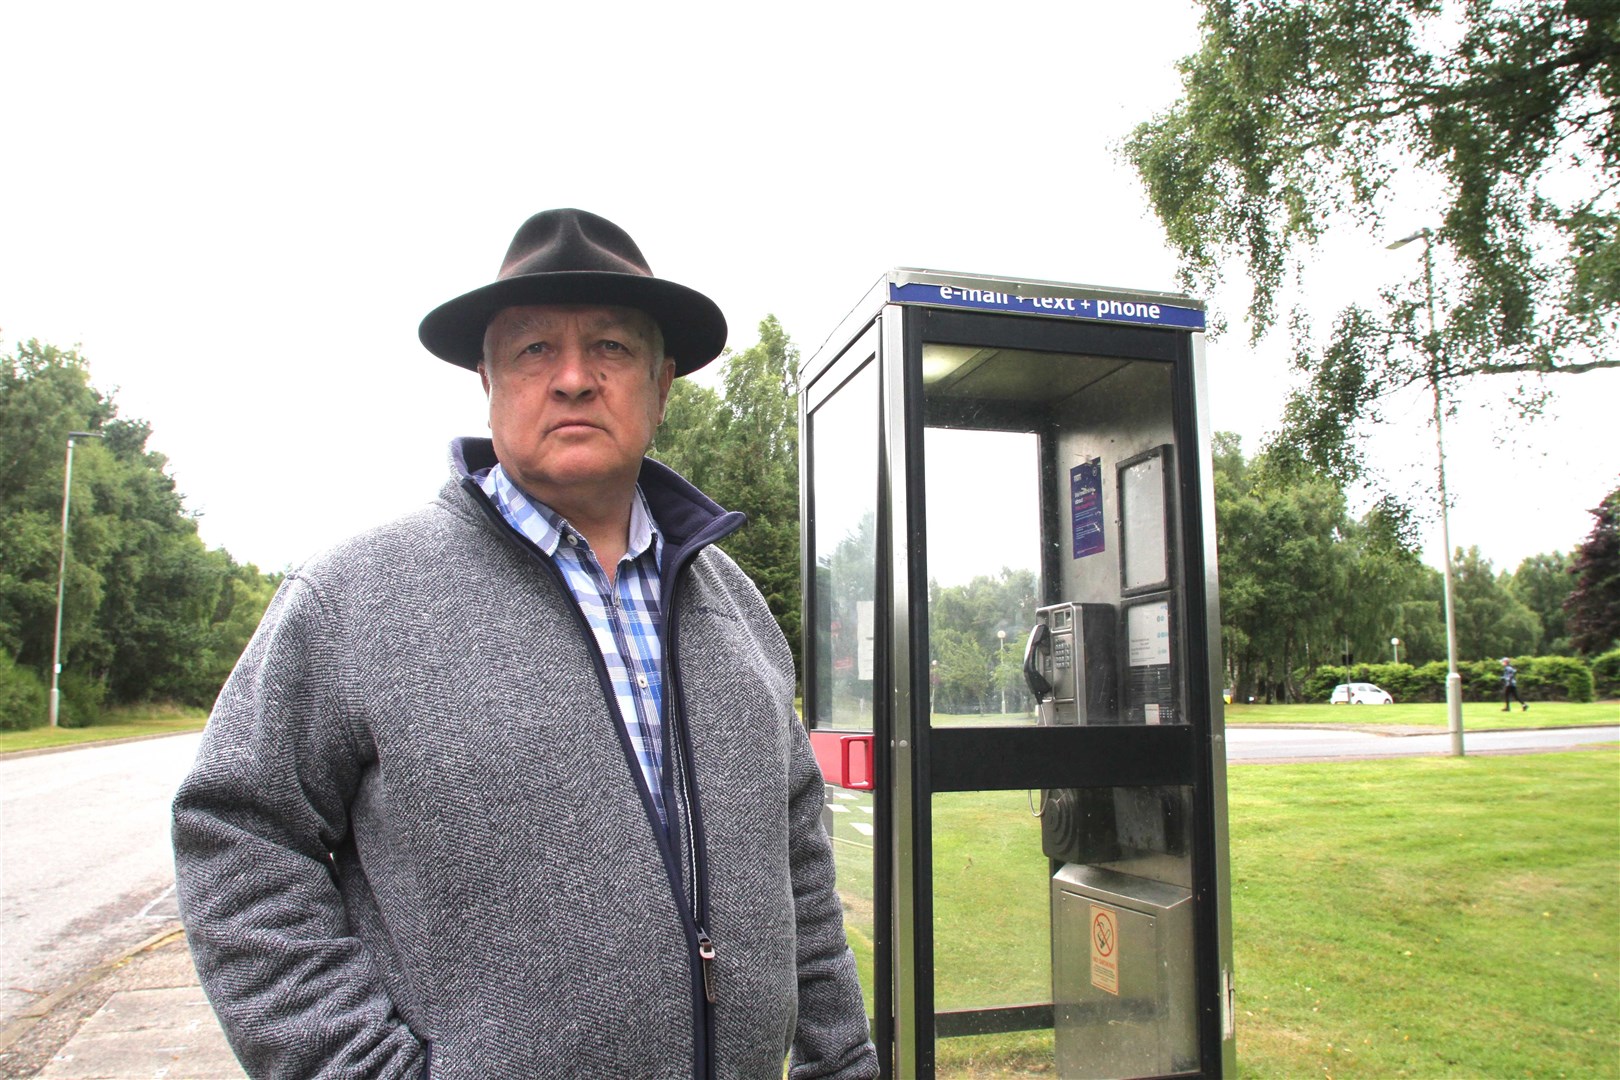 Councillor Bill Lobban at the public payphone on Dalfaber Drive in Aviemore.